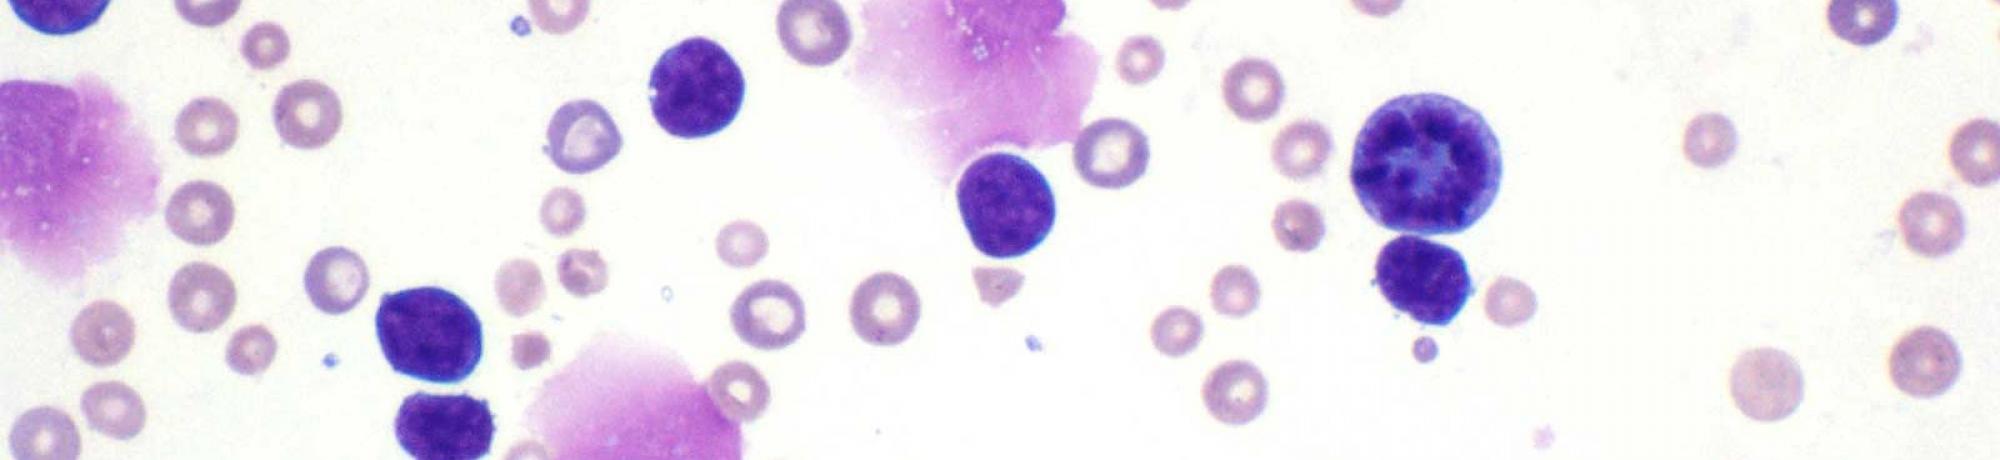 Blood smear from leukemic mouse